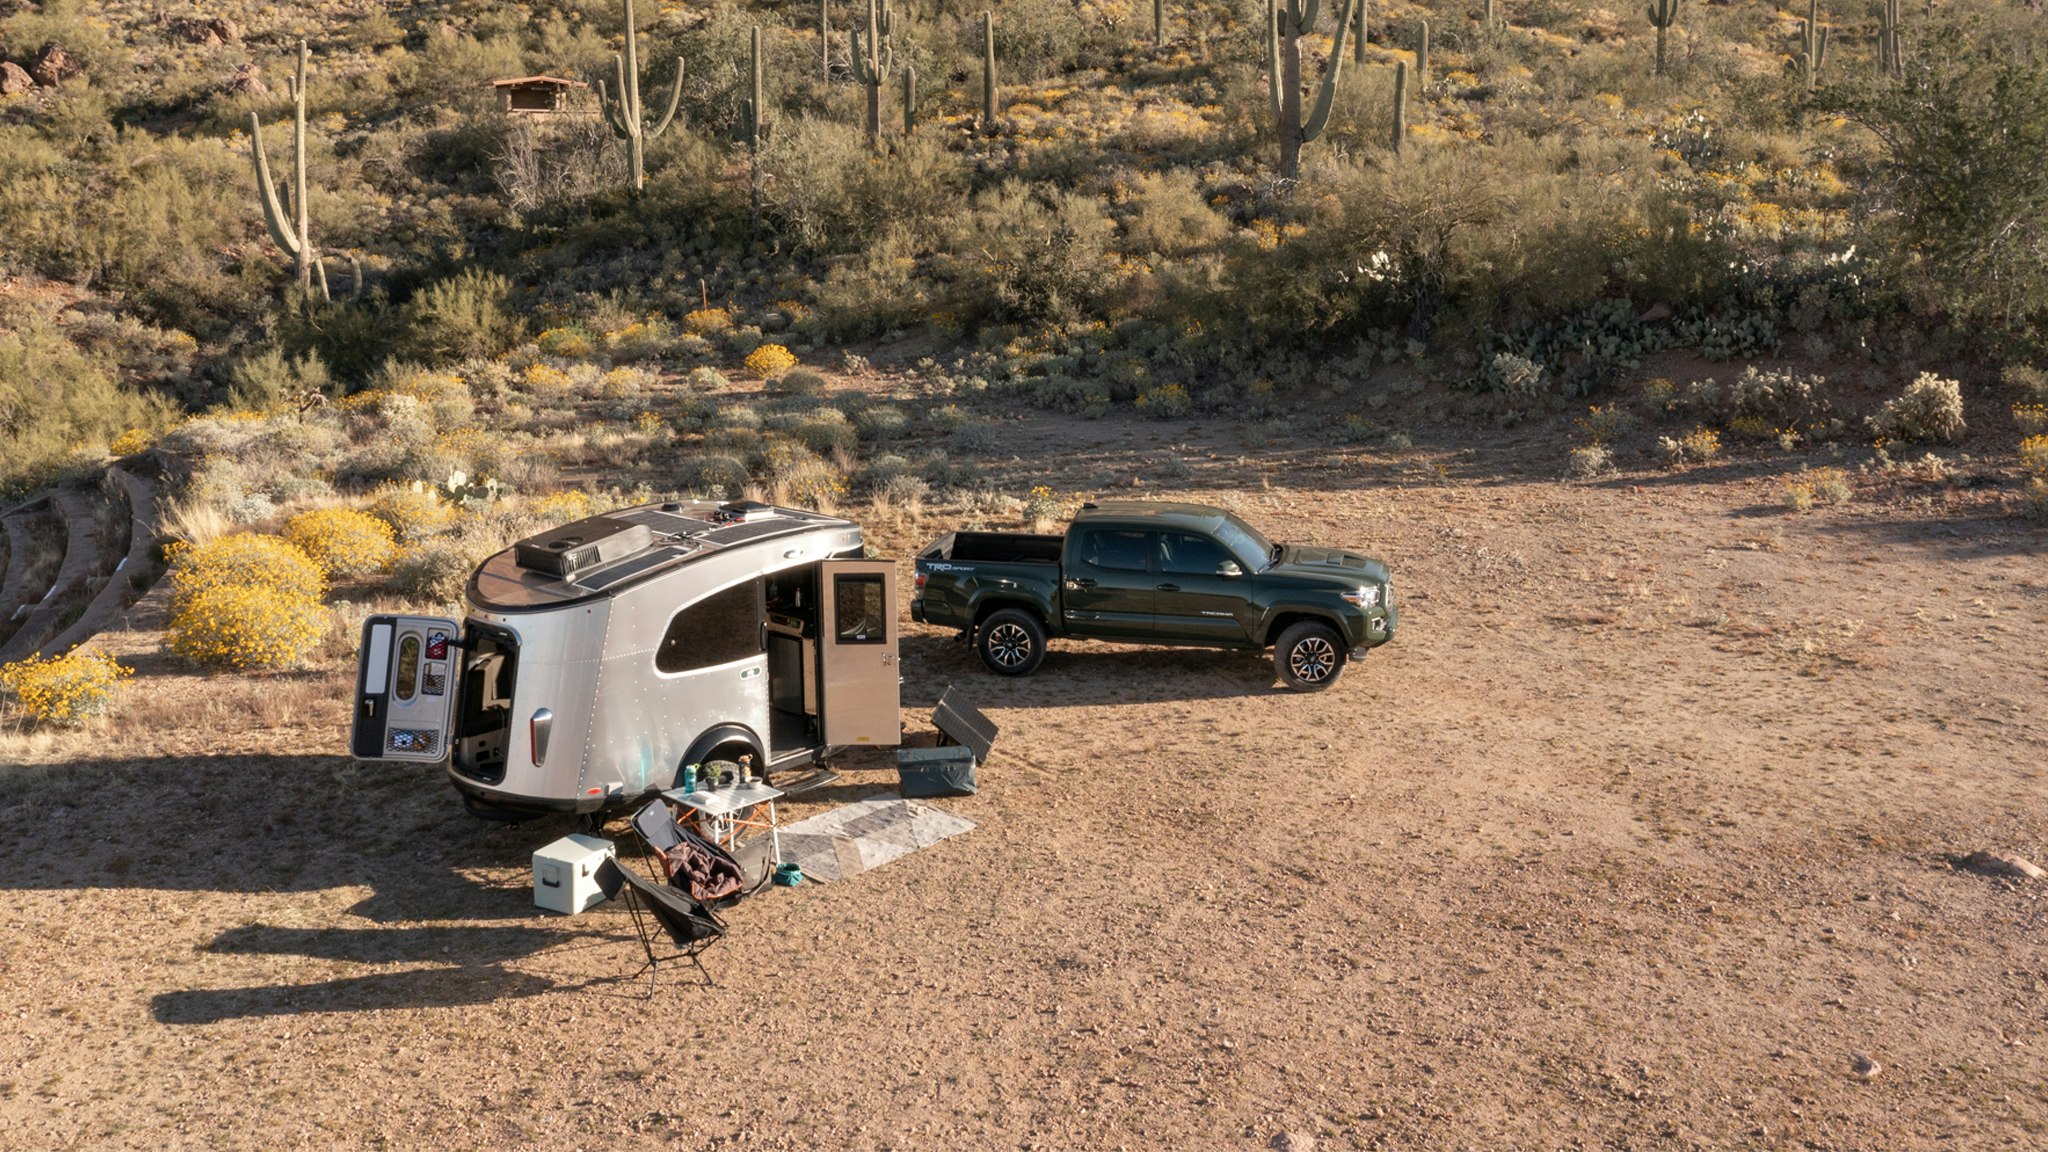 An Airstream REI Co-op Basecamp travel trailer parked at a spot in Arizona with the campsite set up and a green truck parked next to the camper.